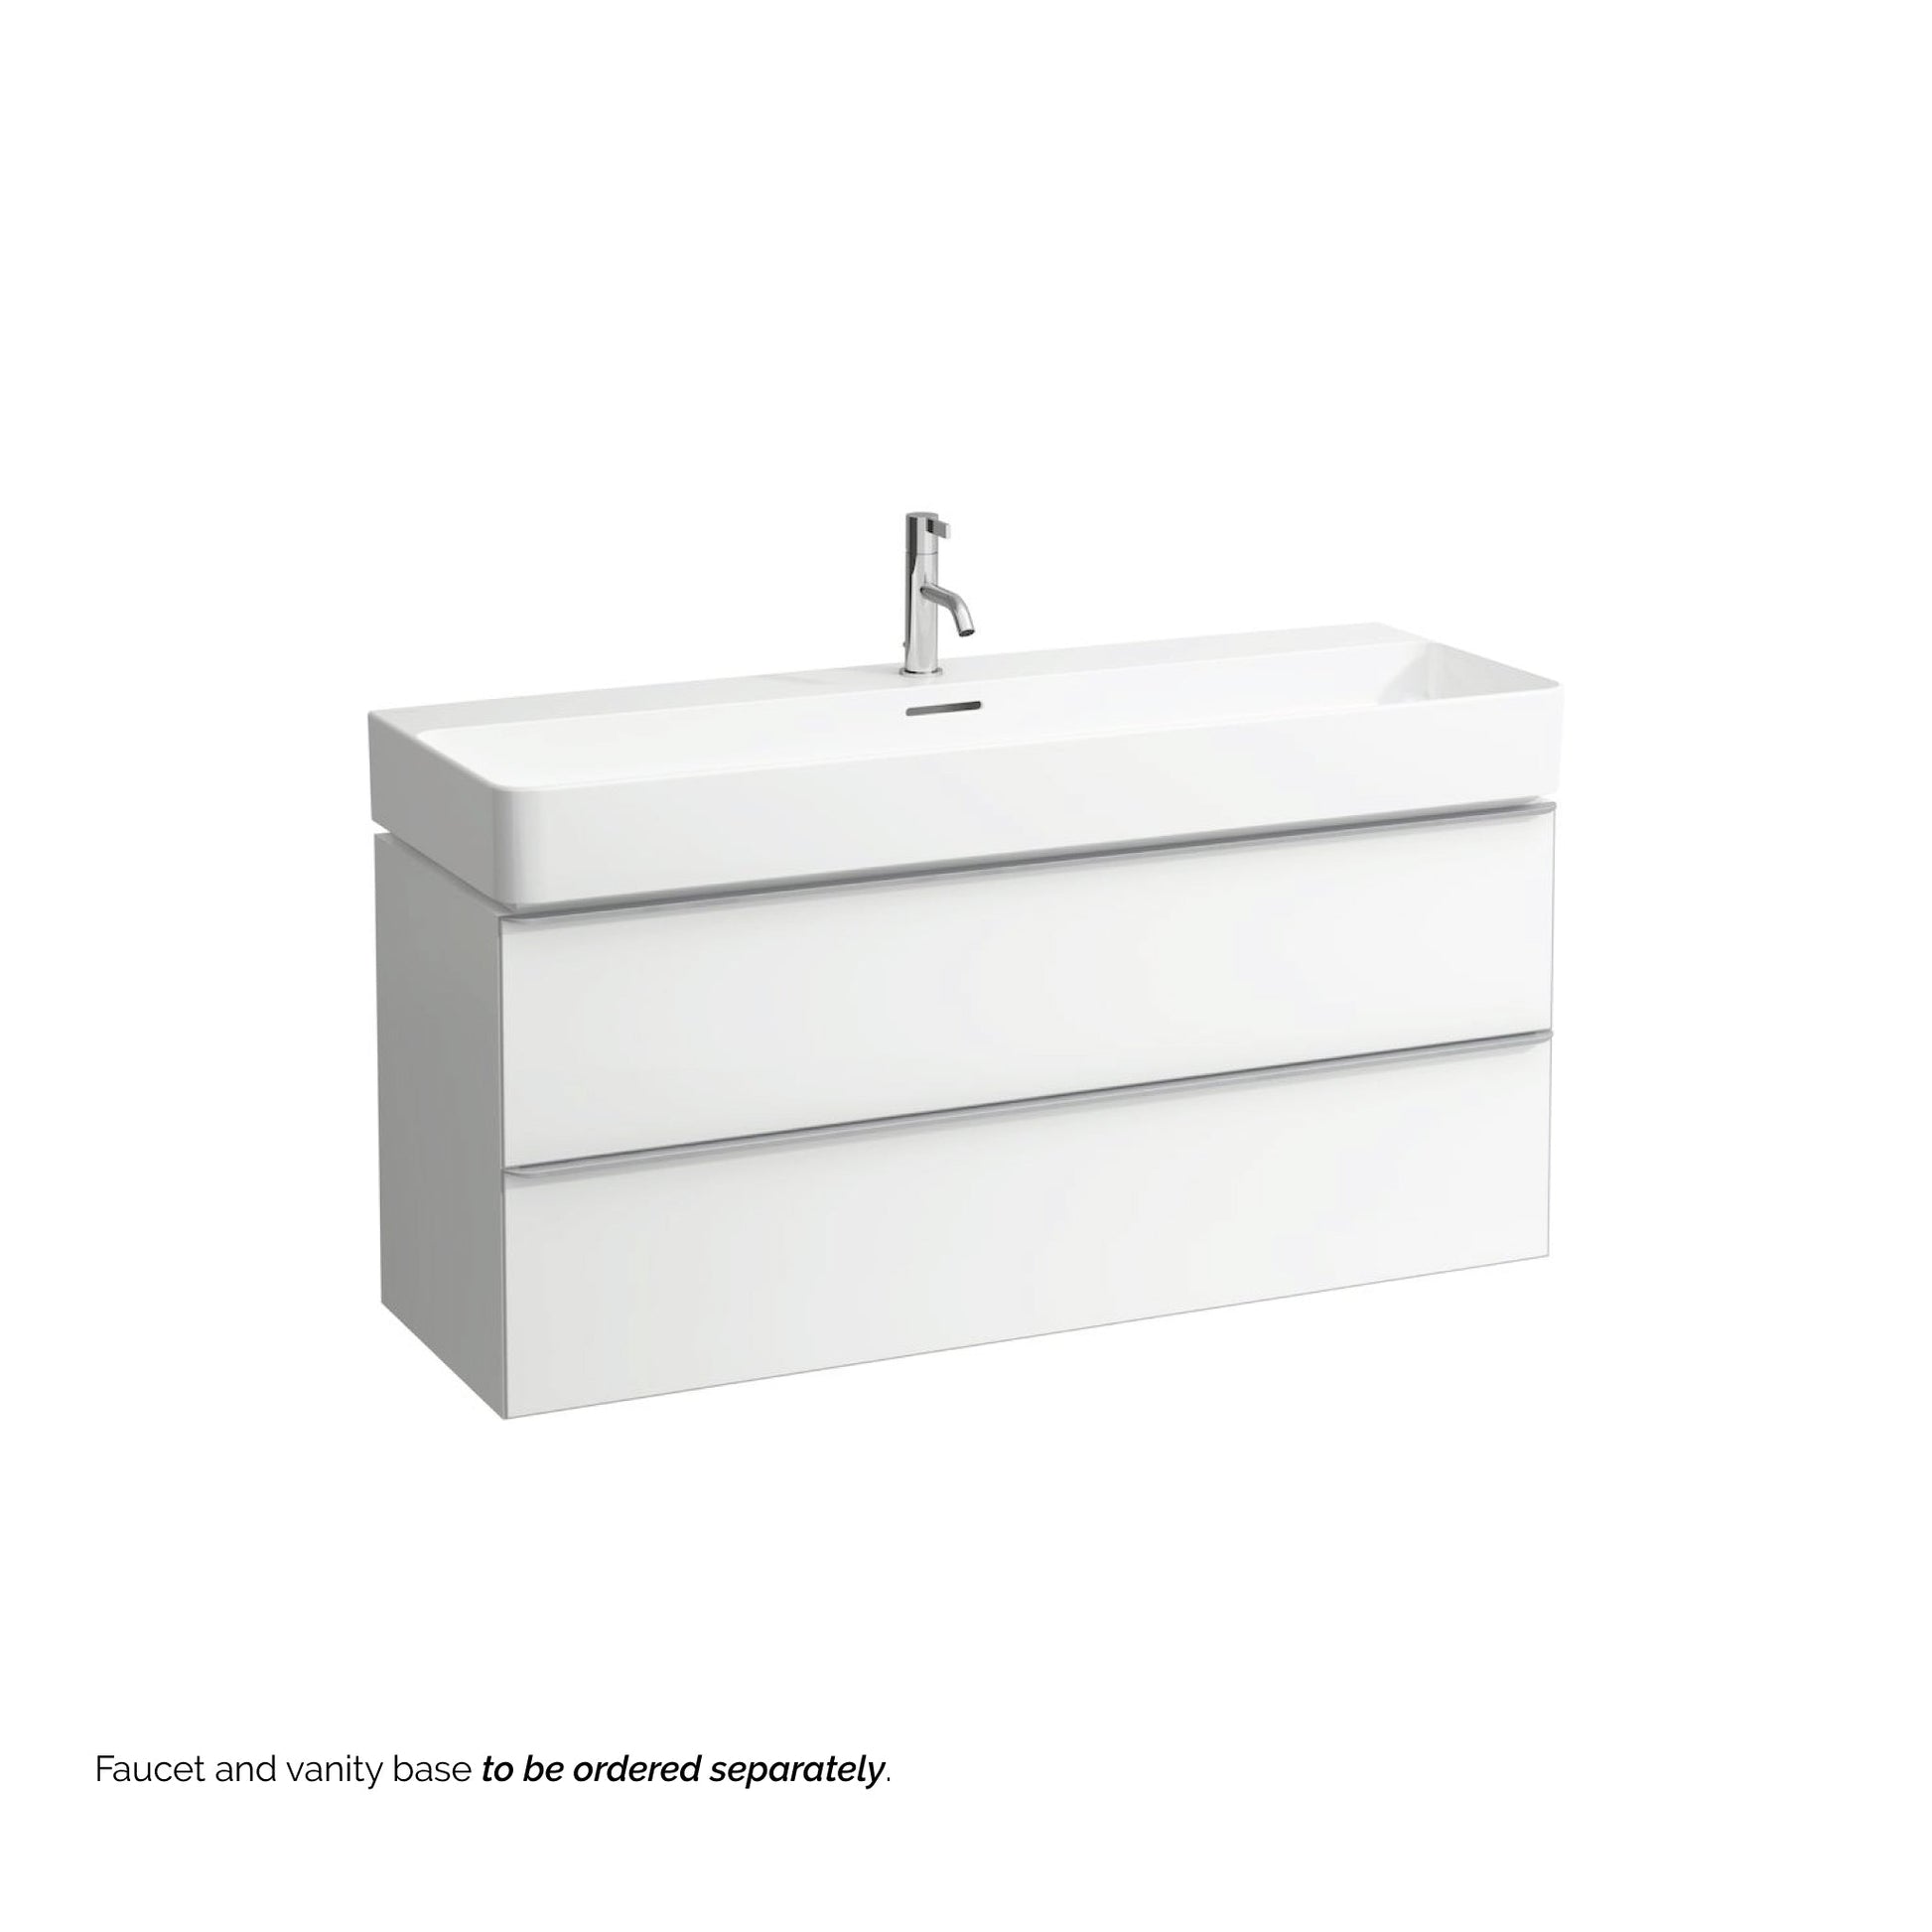 Laufen Val 47" x 17" Matte White Ceramic Wall-Mounted Bathroom Sink With Faucet Hole